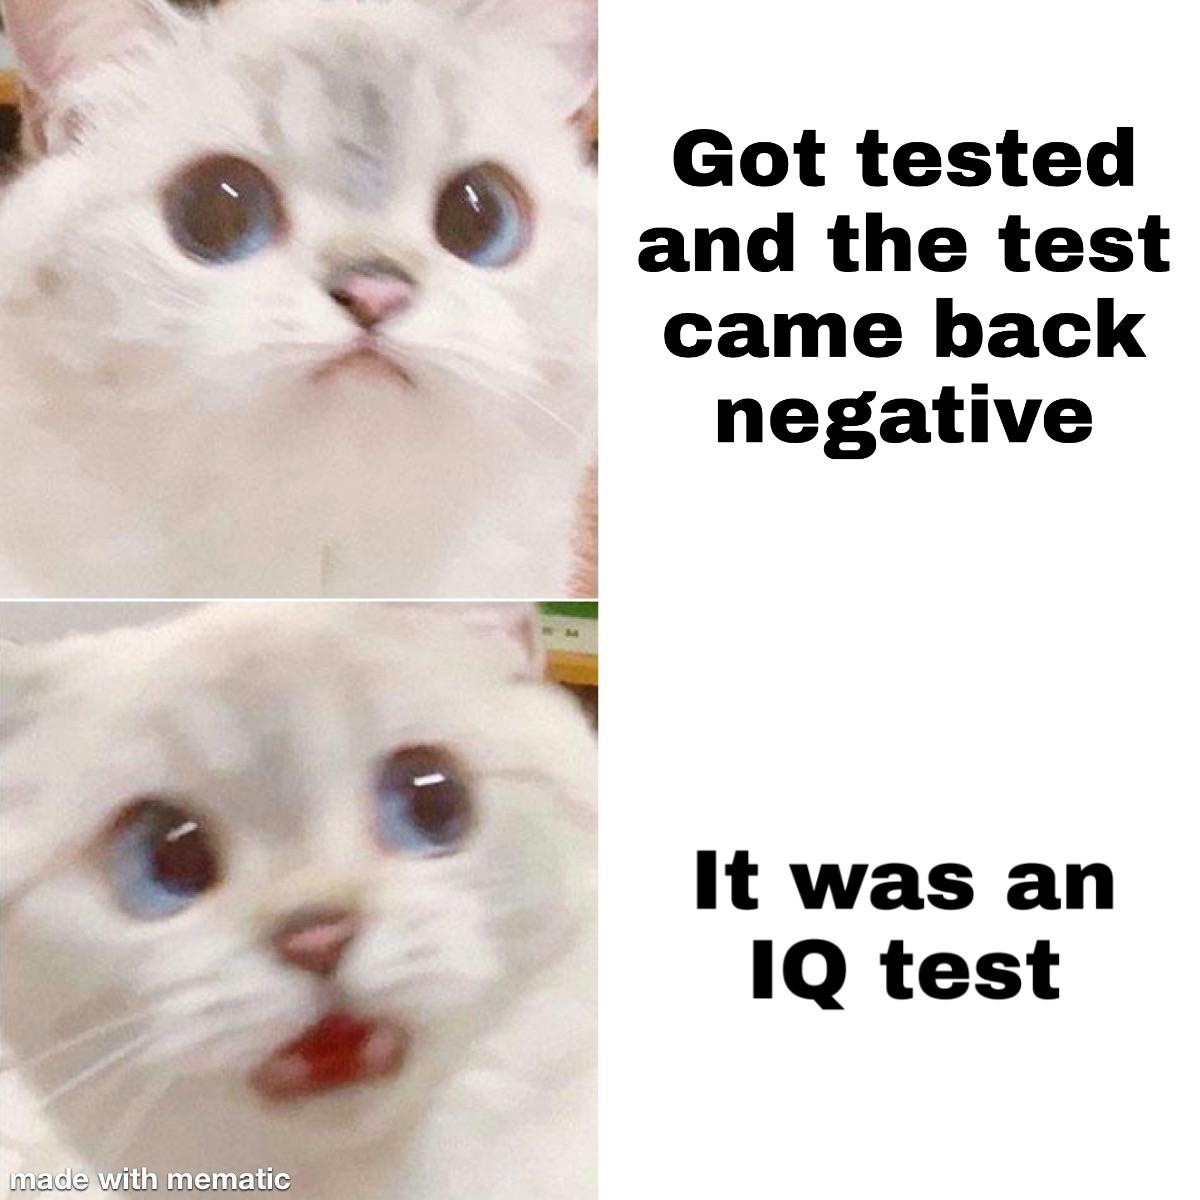 funny memes and dank memes - photo caption - Got tested and the test came back negative It was an Iq test made with mematic